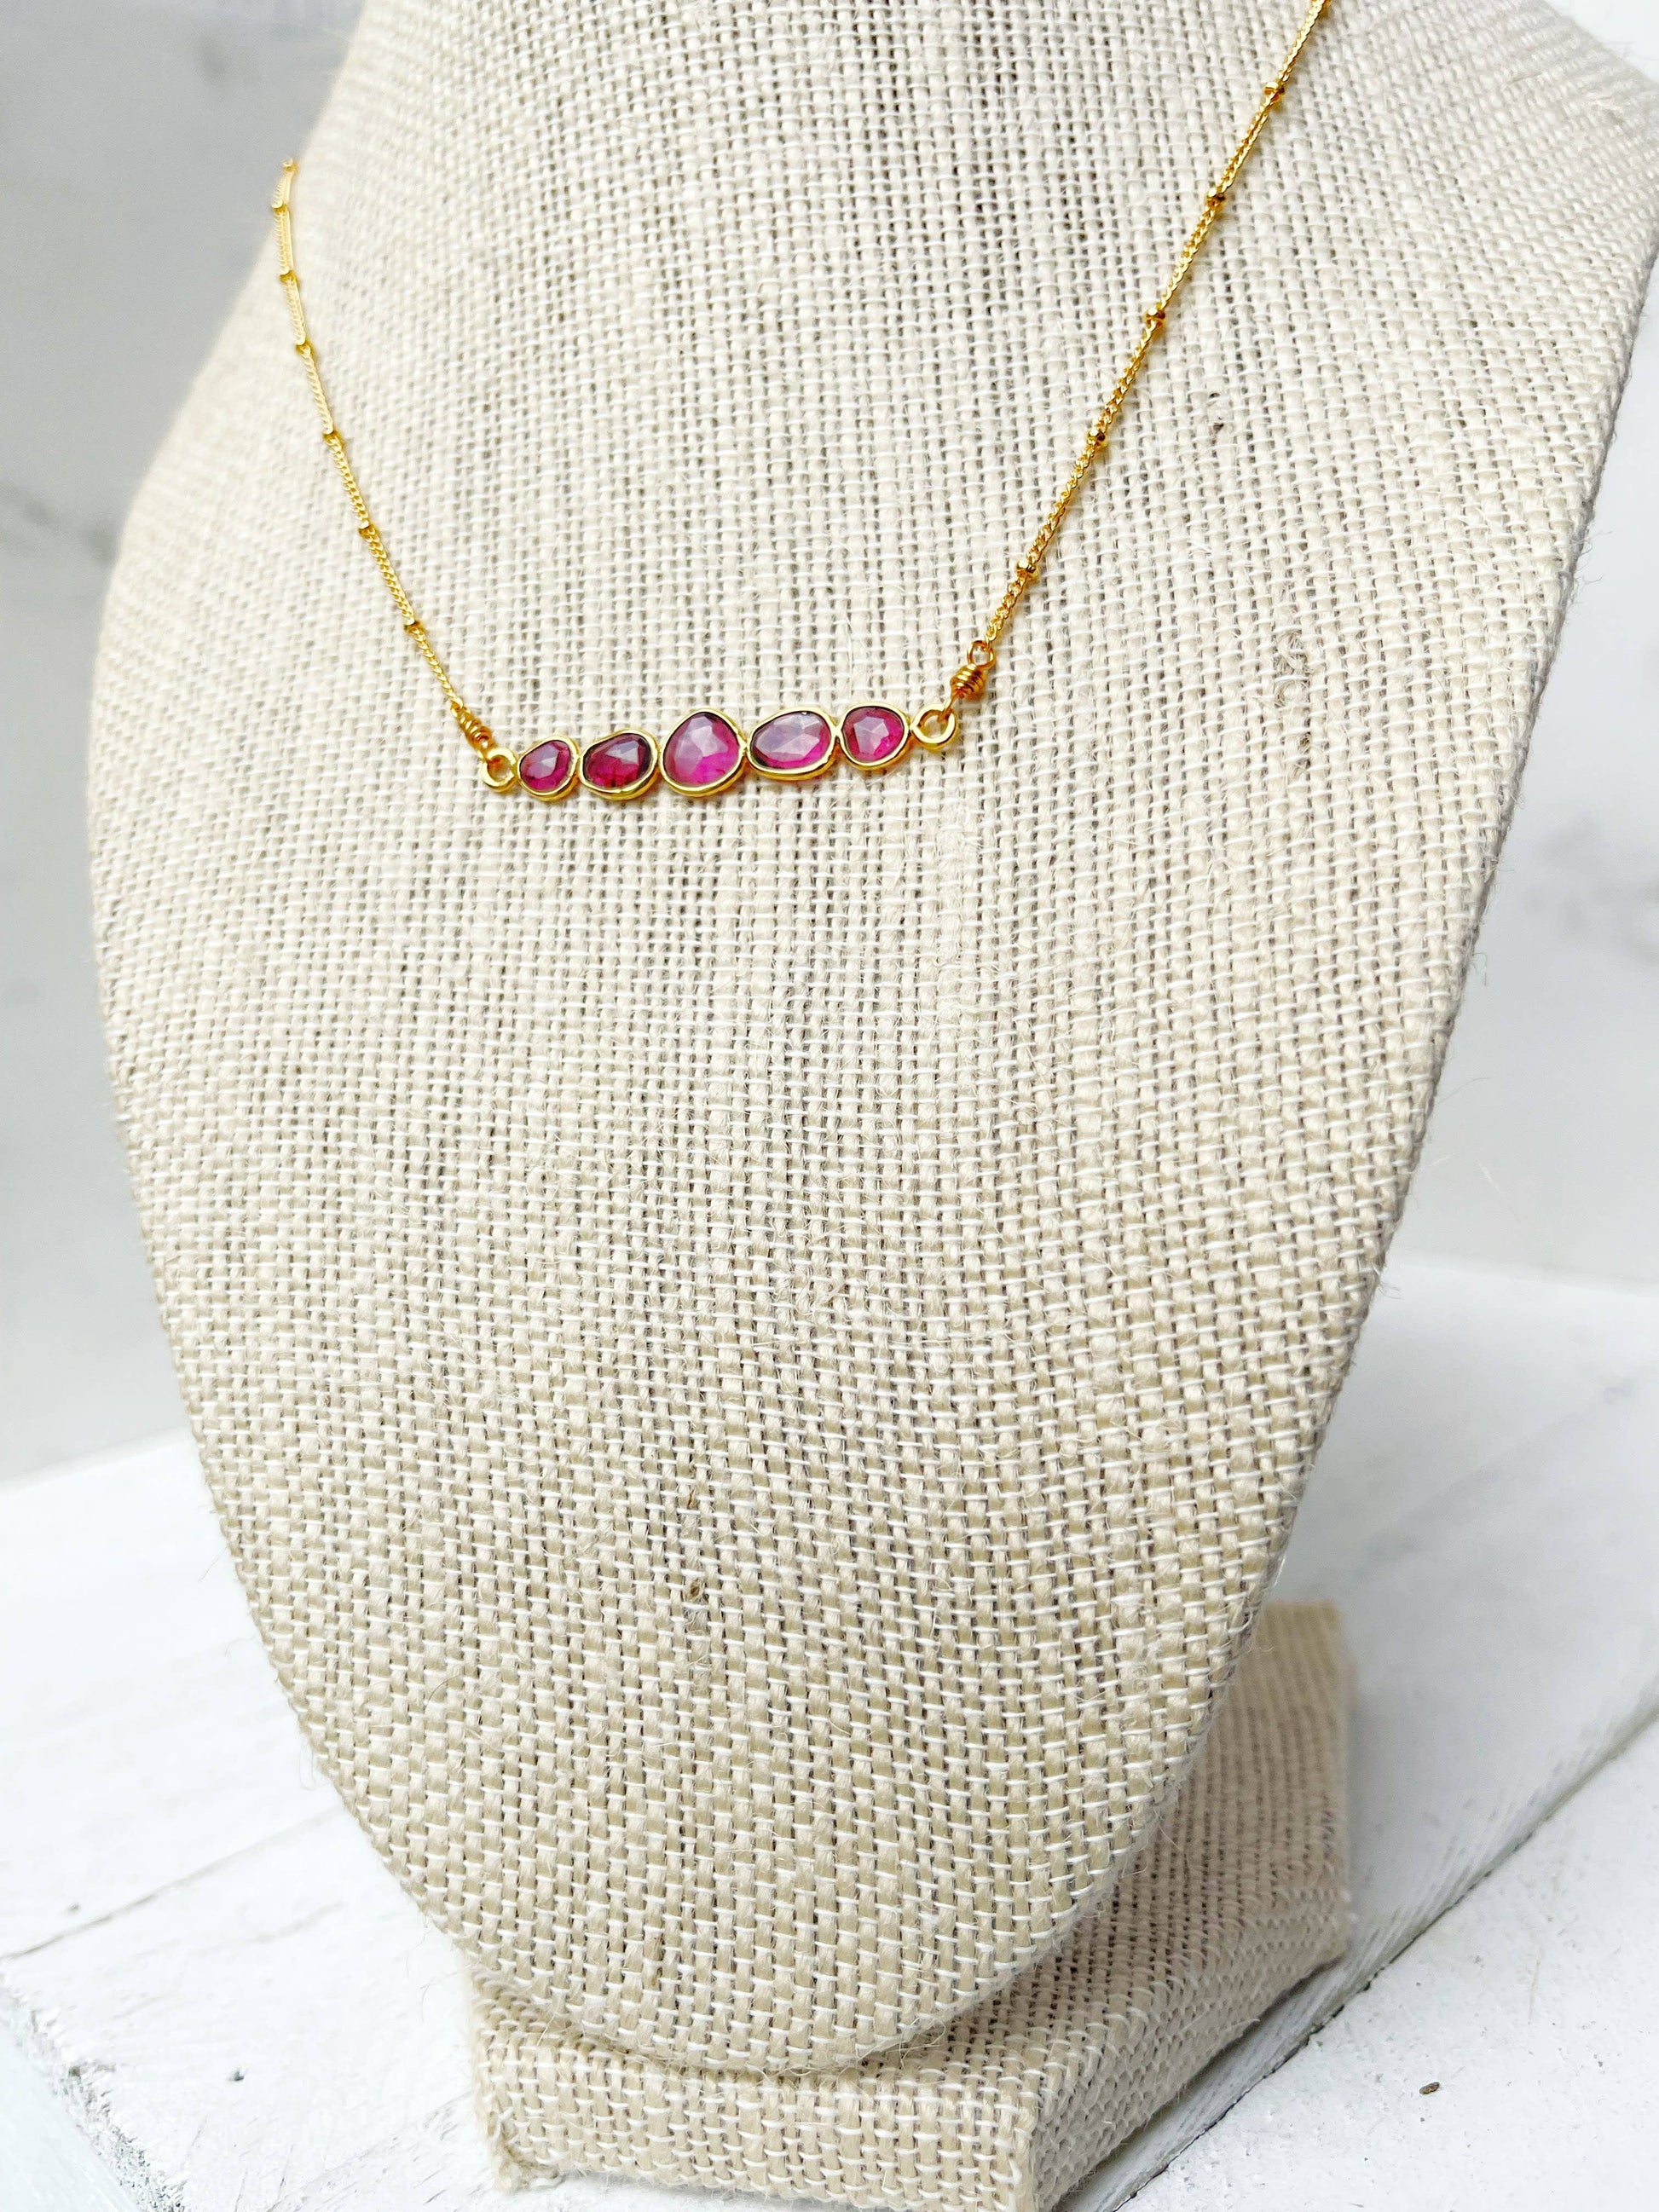 Bar necklace made with Rhodolite gemstones gold plated